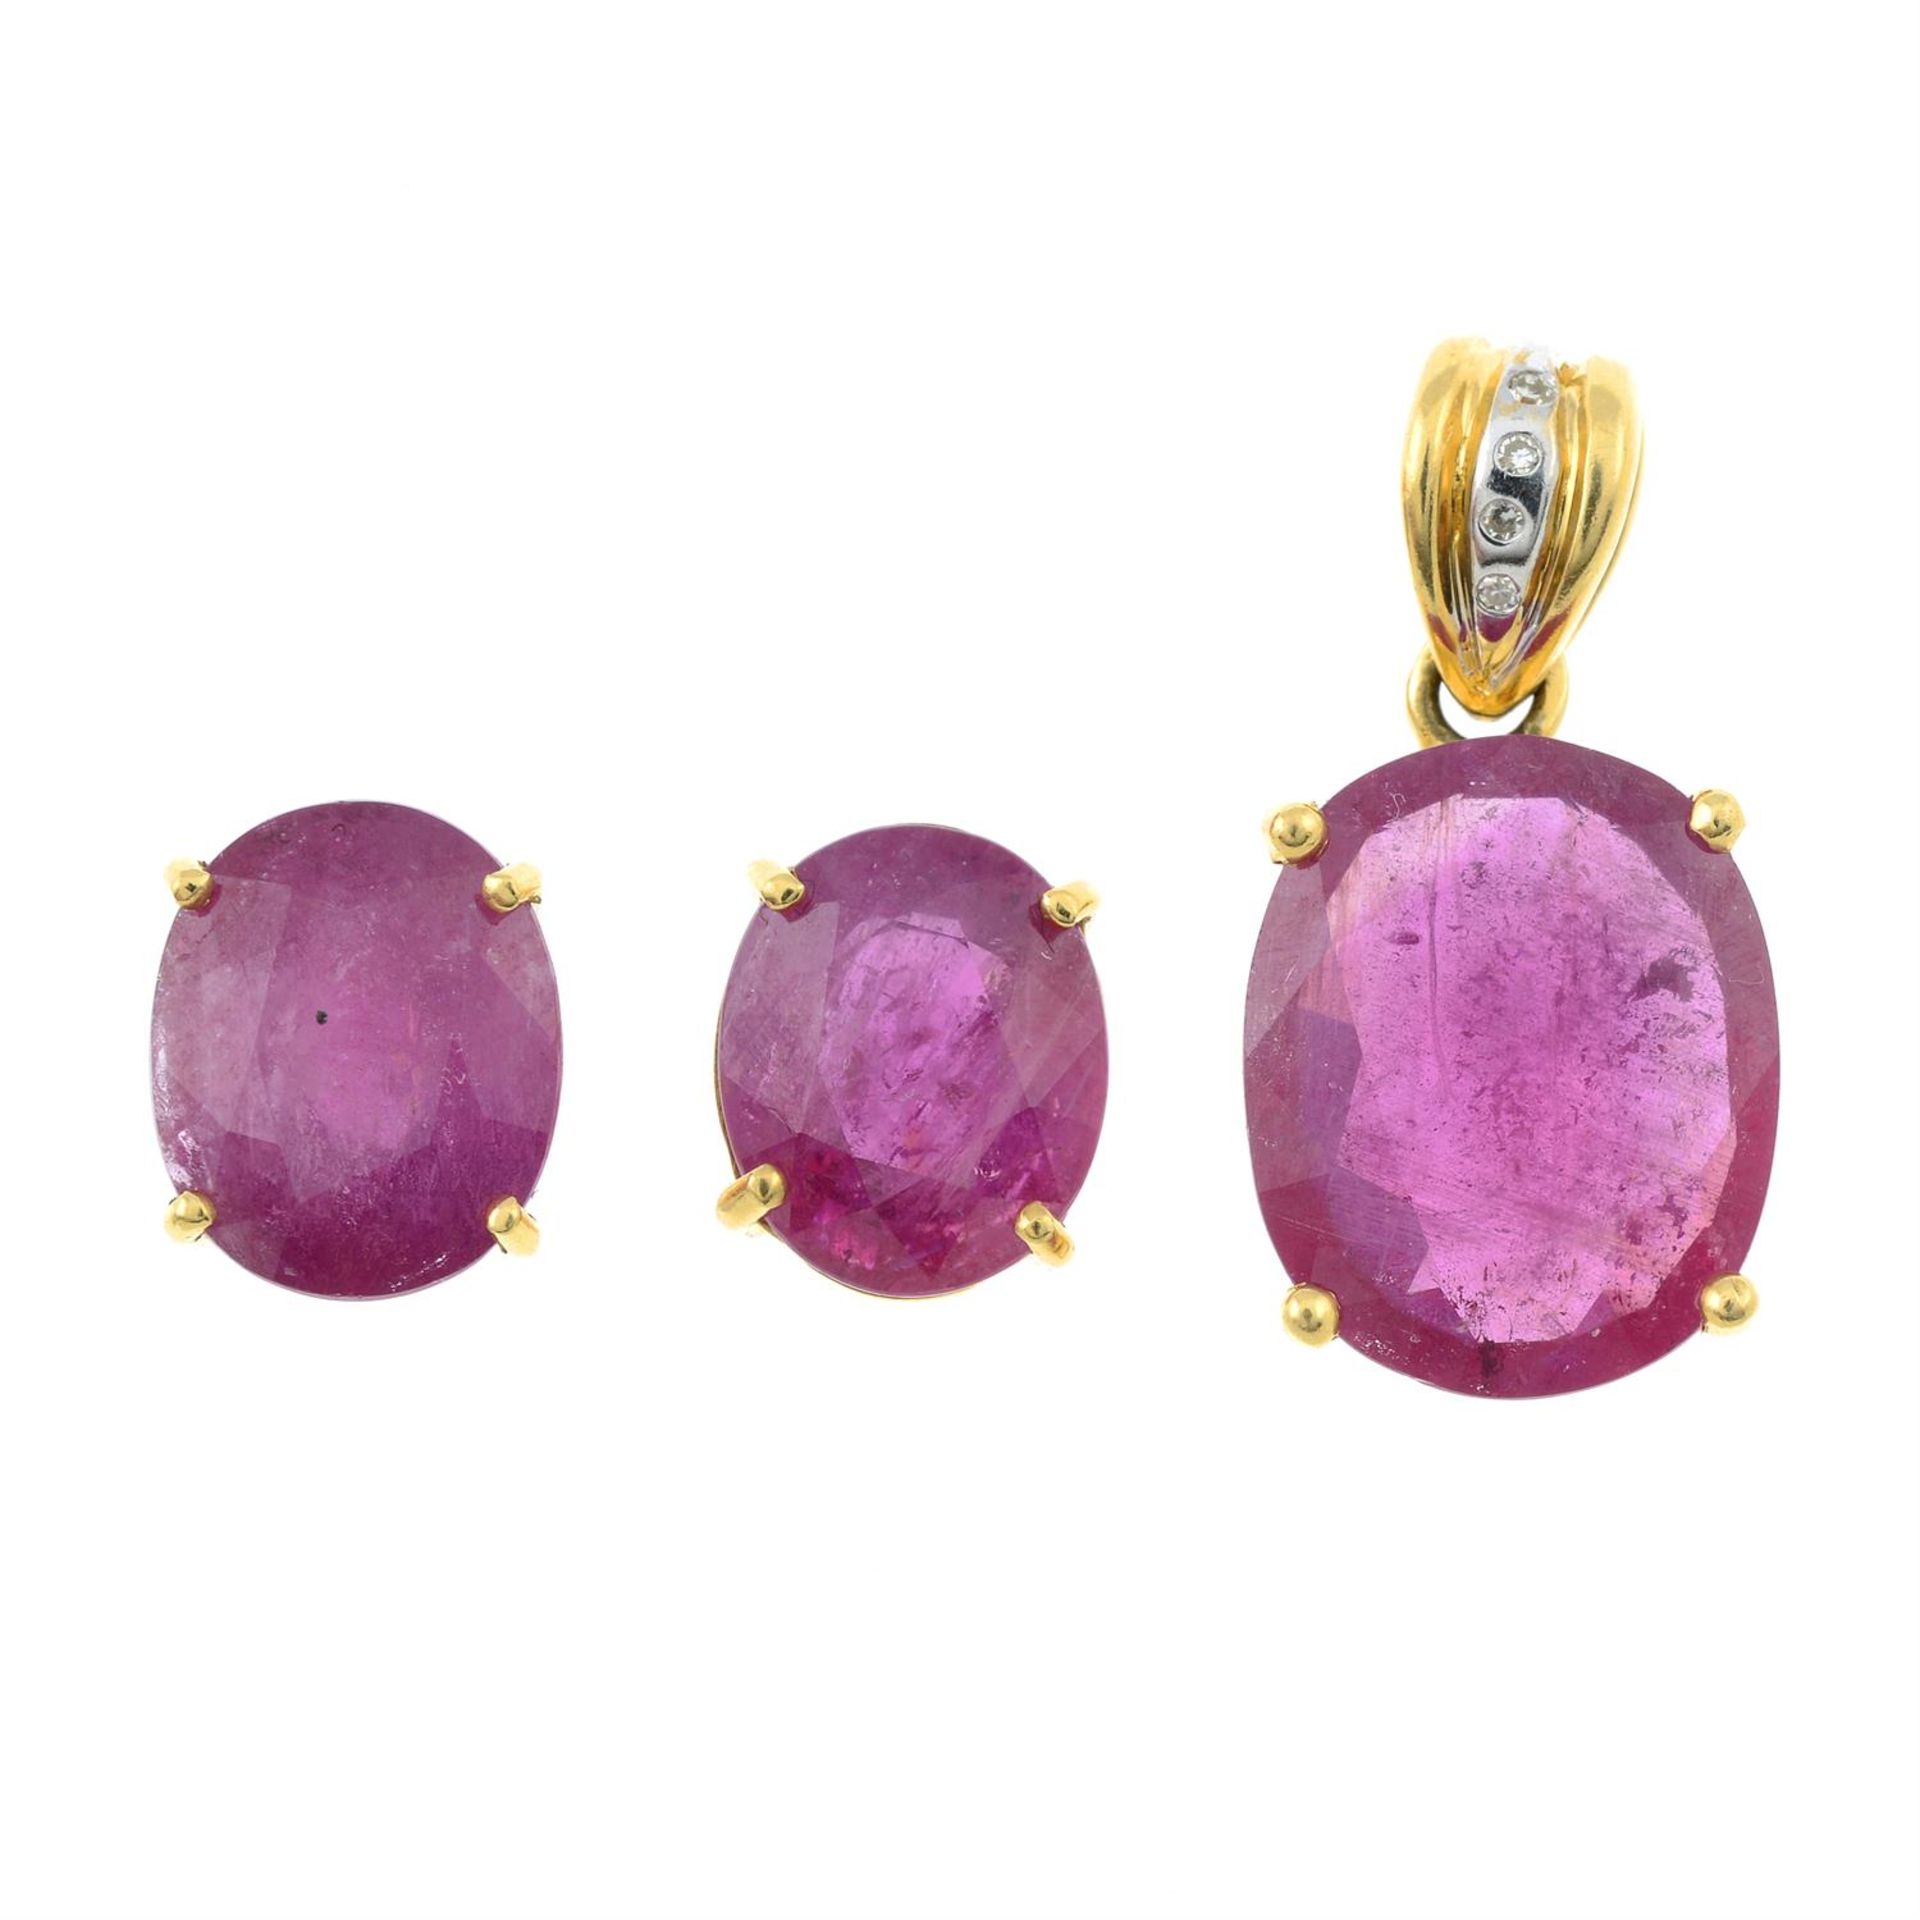 An 18ct gold glass-filled ruby and diamond pendant, together with a pair of glass-filled ruby